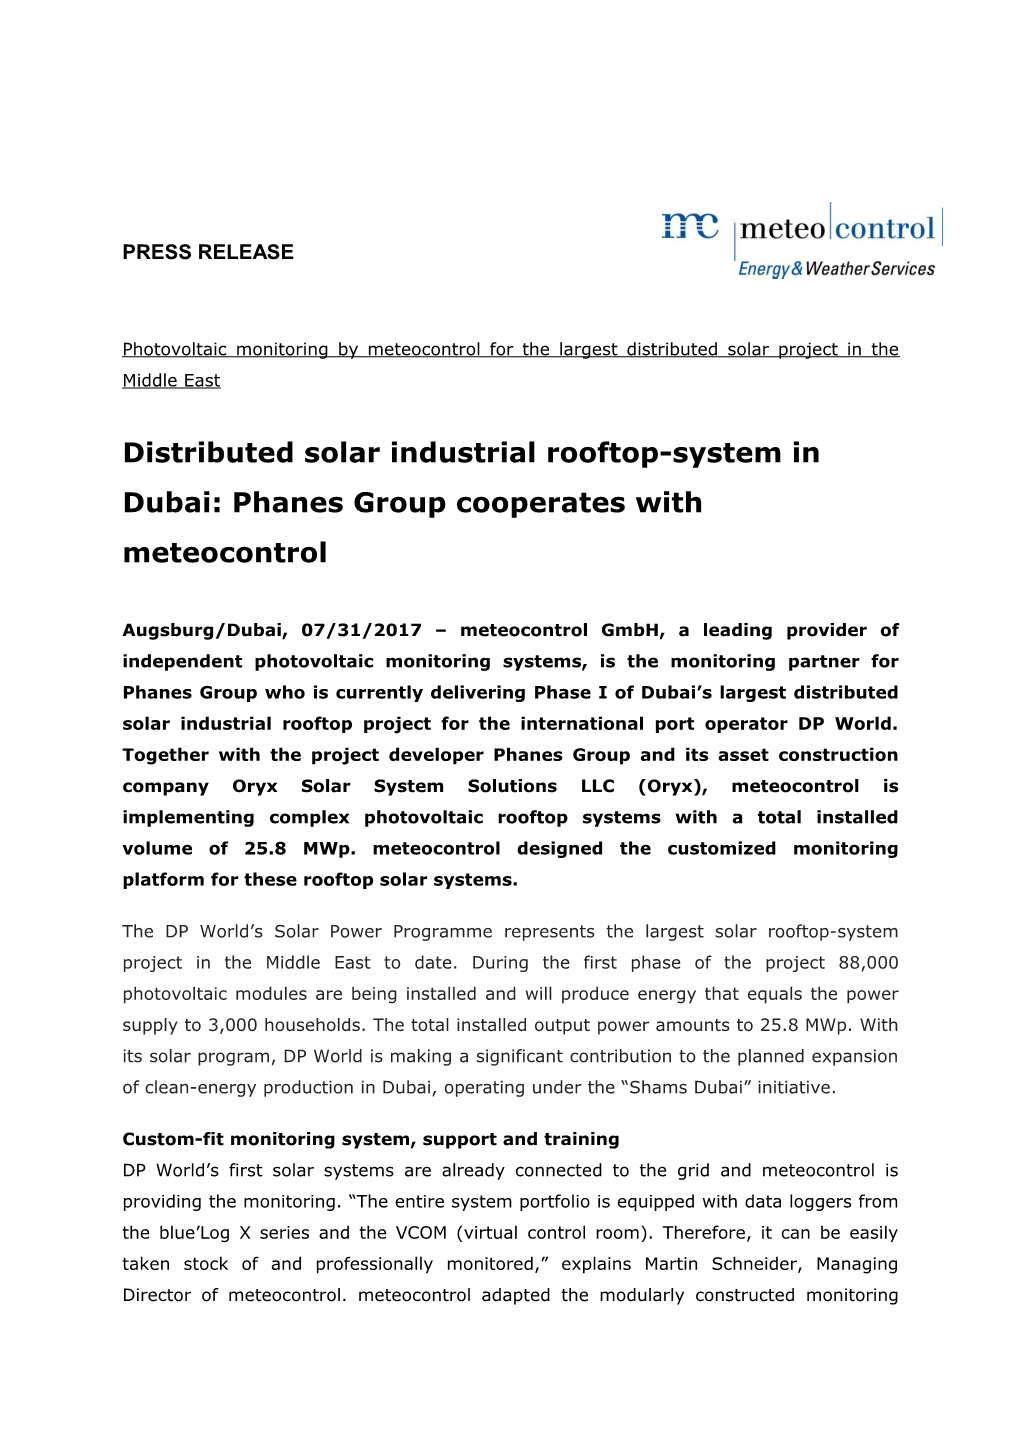 Distributed Solar Industrial Rooftop-System in Dubai: Phanes Group Cooperates with Meteocontrol